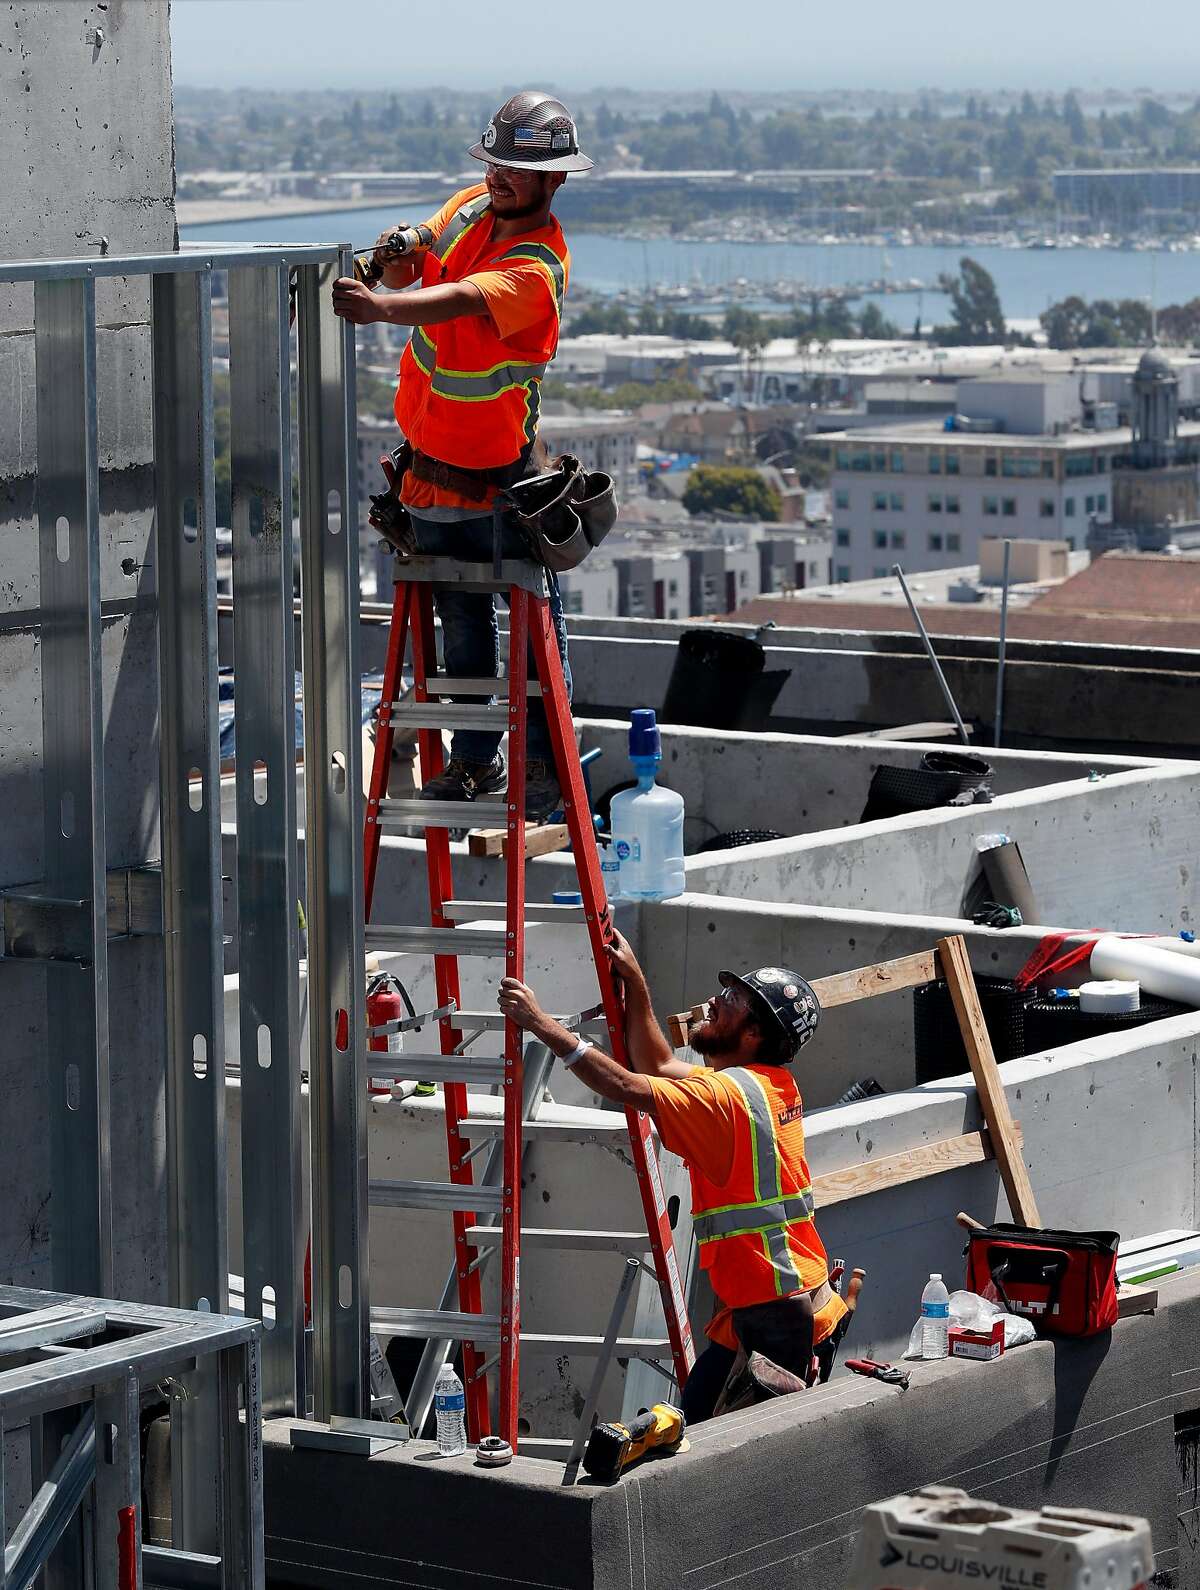 Workers construct a facade wall from metal studs at the construction site of a 20-story residential building going up on the 1700 block fo Webster Street in Oakland Calif., on Wednesday, July 17, 2019. Oakland�s downtown has long been revered as hip, electric and historic. Five years ago, the area underwent a transformation minority-owned nail salons shuttered and were instead replaced by hipster bike shops. Now, stores and other businesses are facing a similar transformation as cranes dot the skyline and 20-story buildings go up. One downtown block, near 17th and Webster, is a microcosm of the change that�s coming once again to downtown Oakland. There are three big development projects currently under construction on that block - two of which will have 20-story towers.